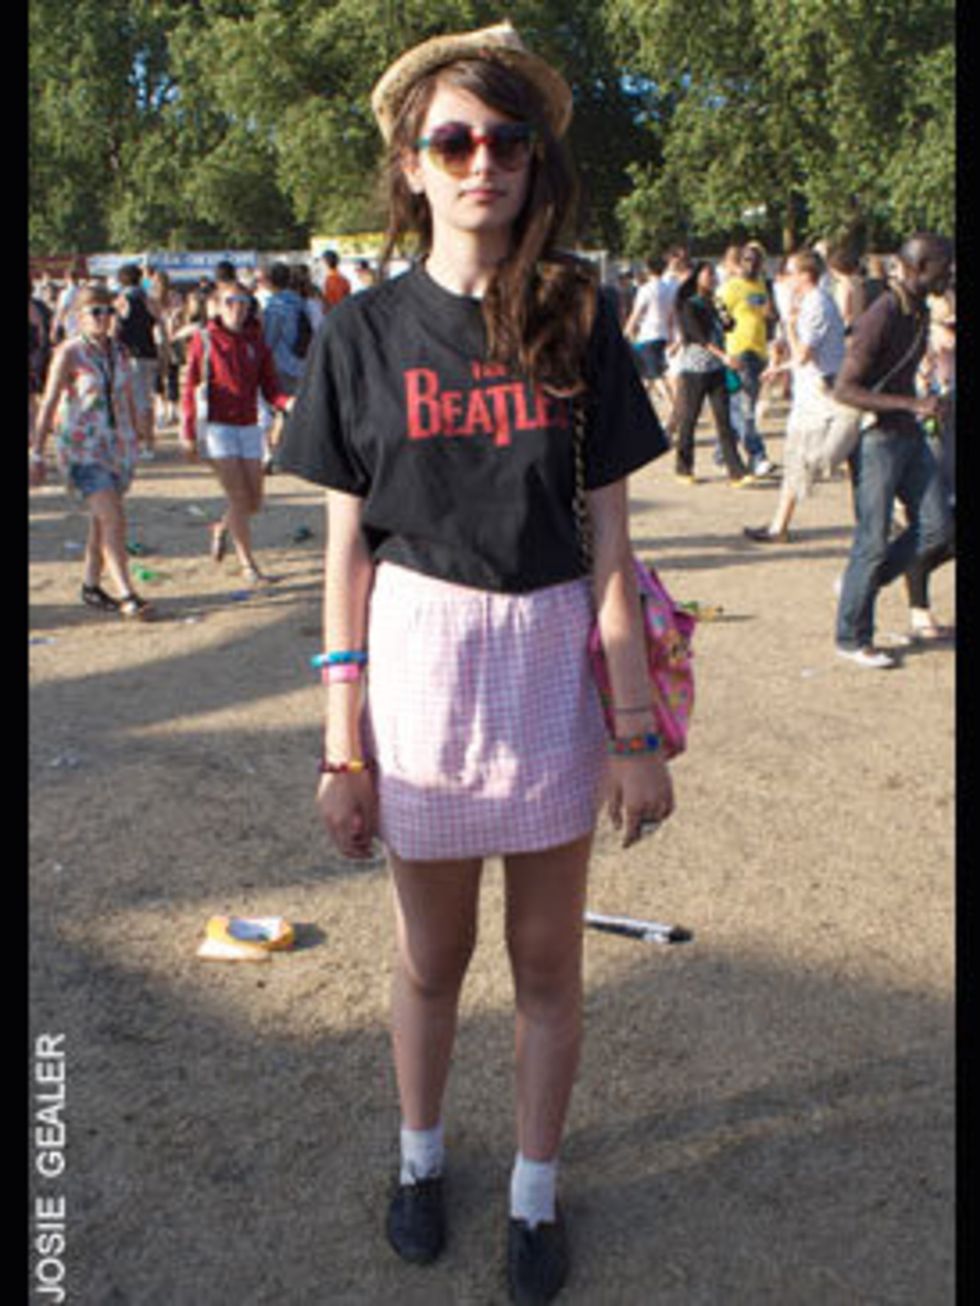 <p>Debi Stylinaivs made the skirt herself, the band tshirt is vintage and her accessories are by Topshop</p>